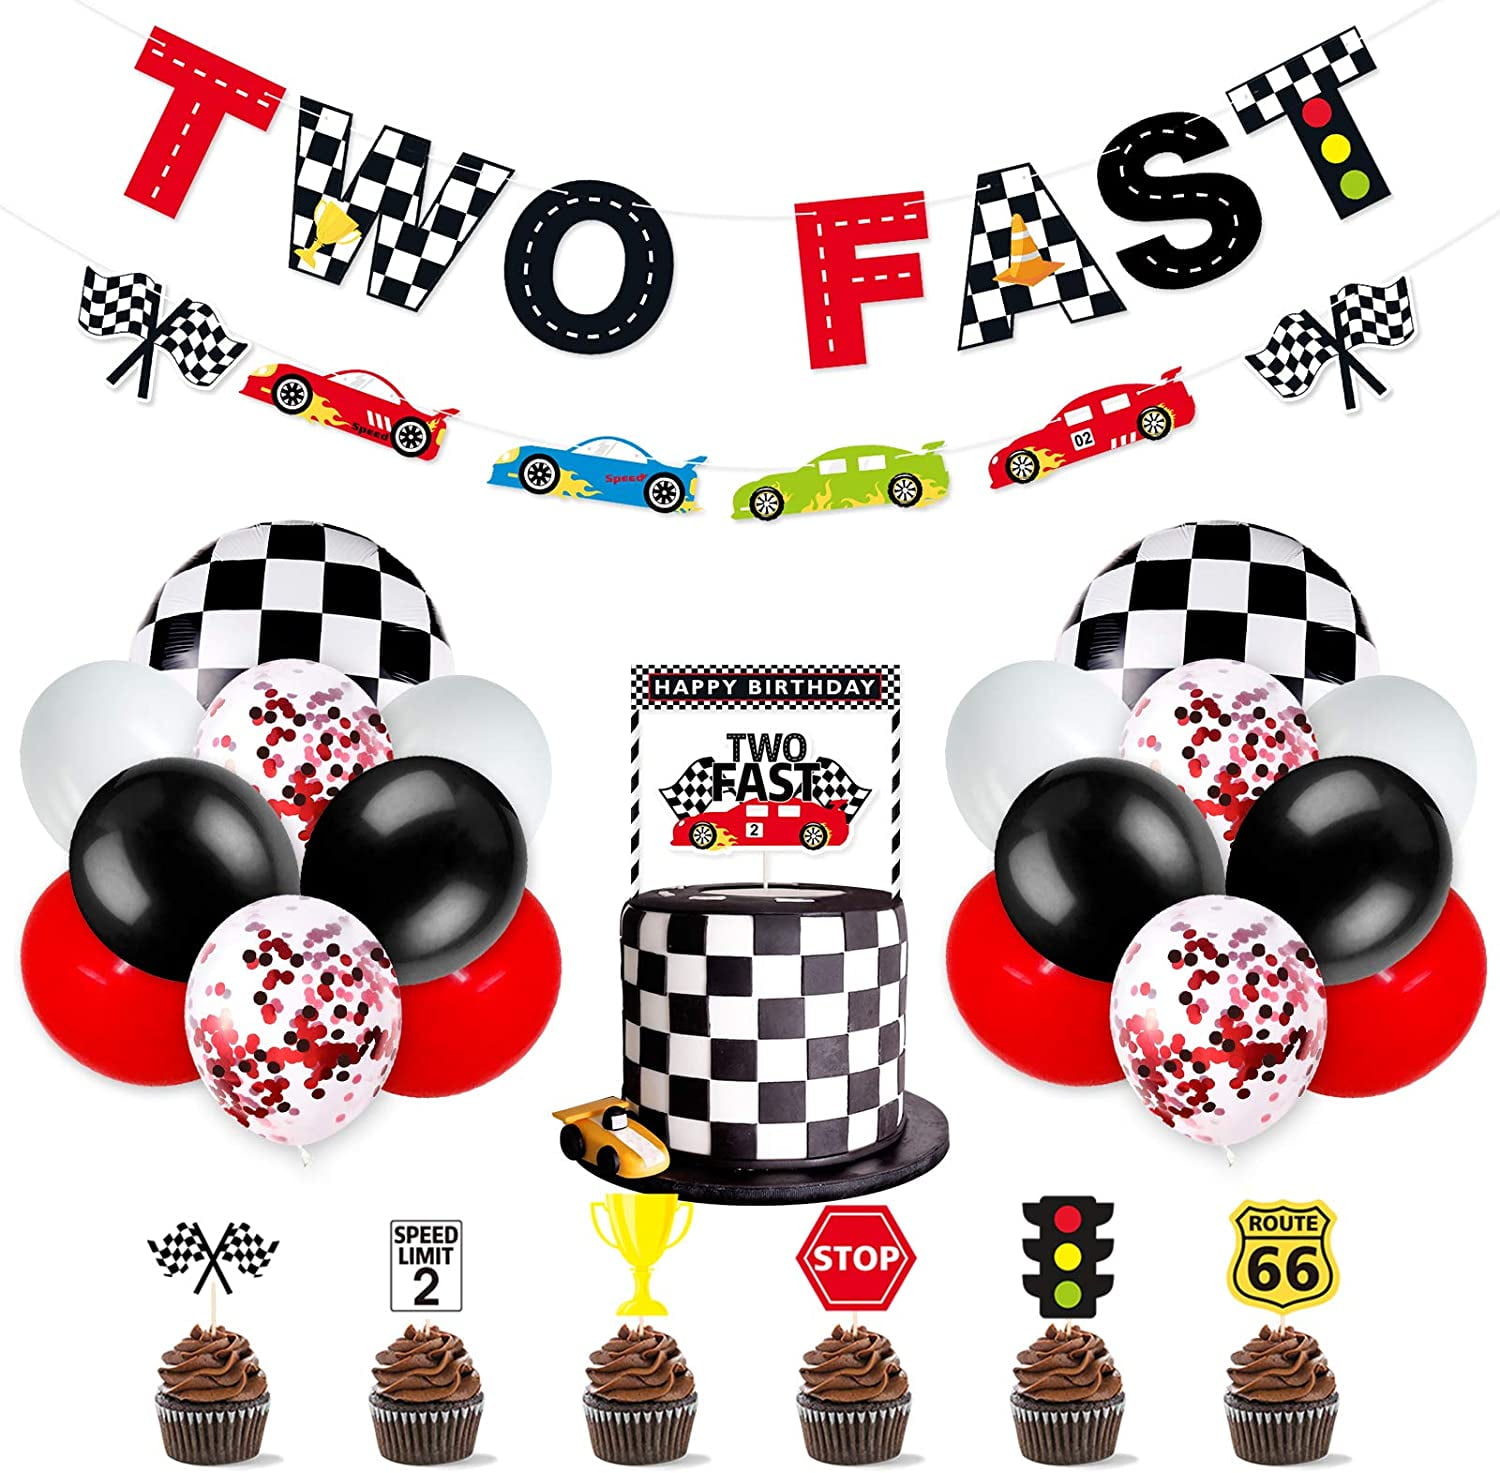 Two Fast Cake Topper Two Fast  Birthday Two Fast Party Decor Two Fast Birthday Race Car Cake Topper Race Car Party Decor Race Car Birthday